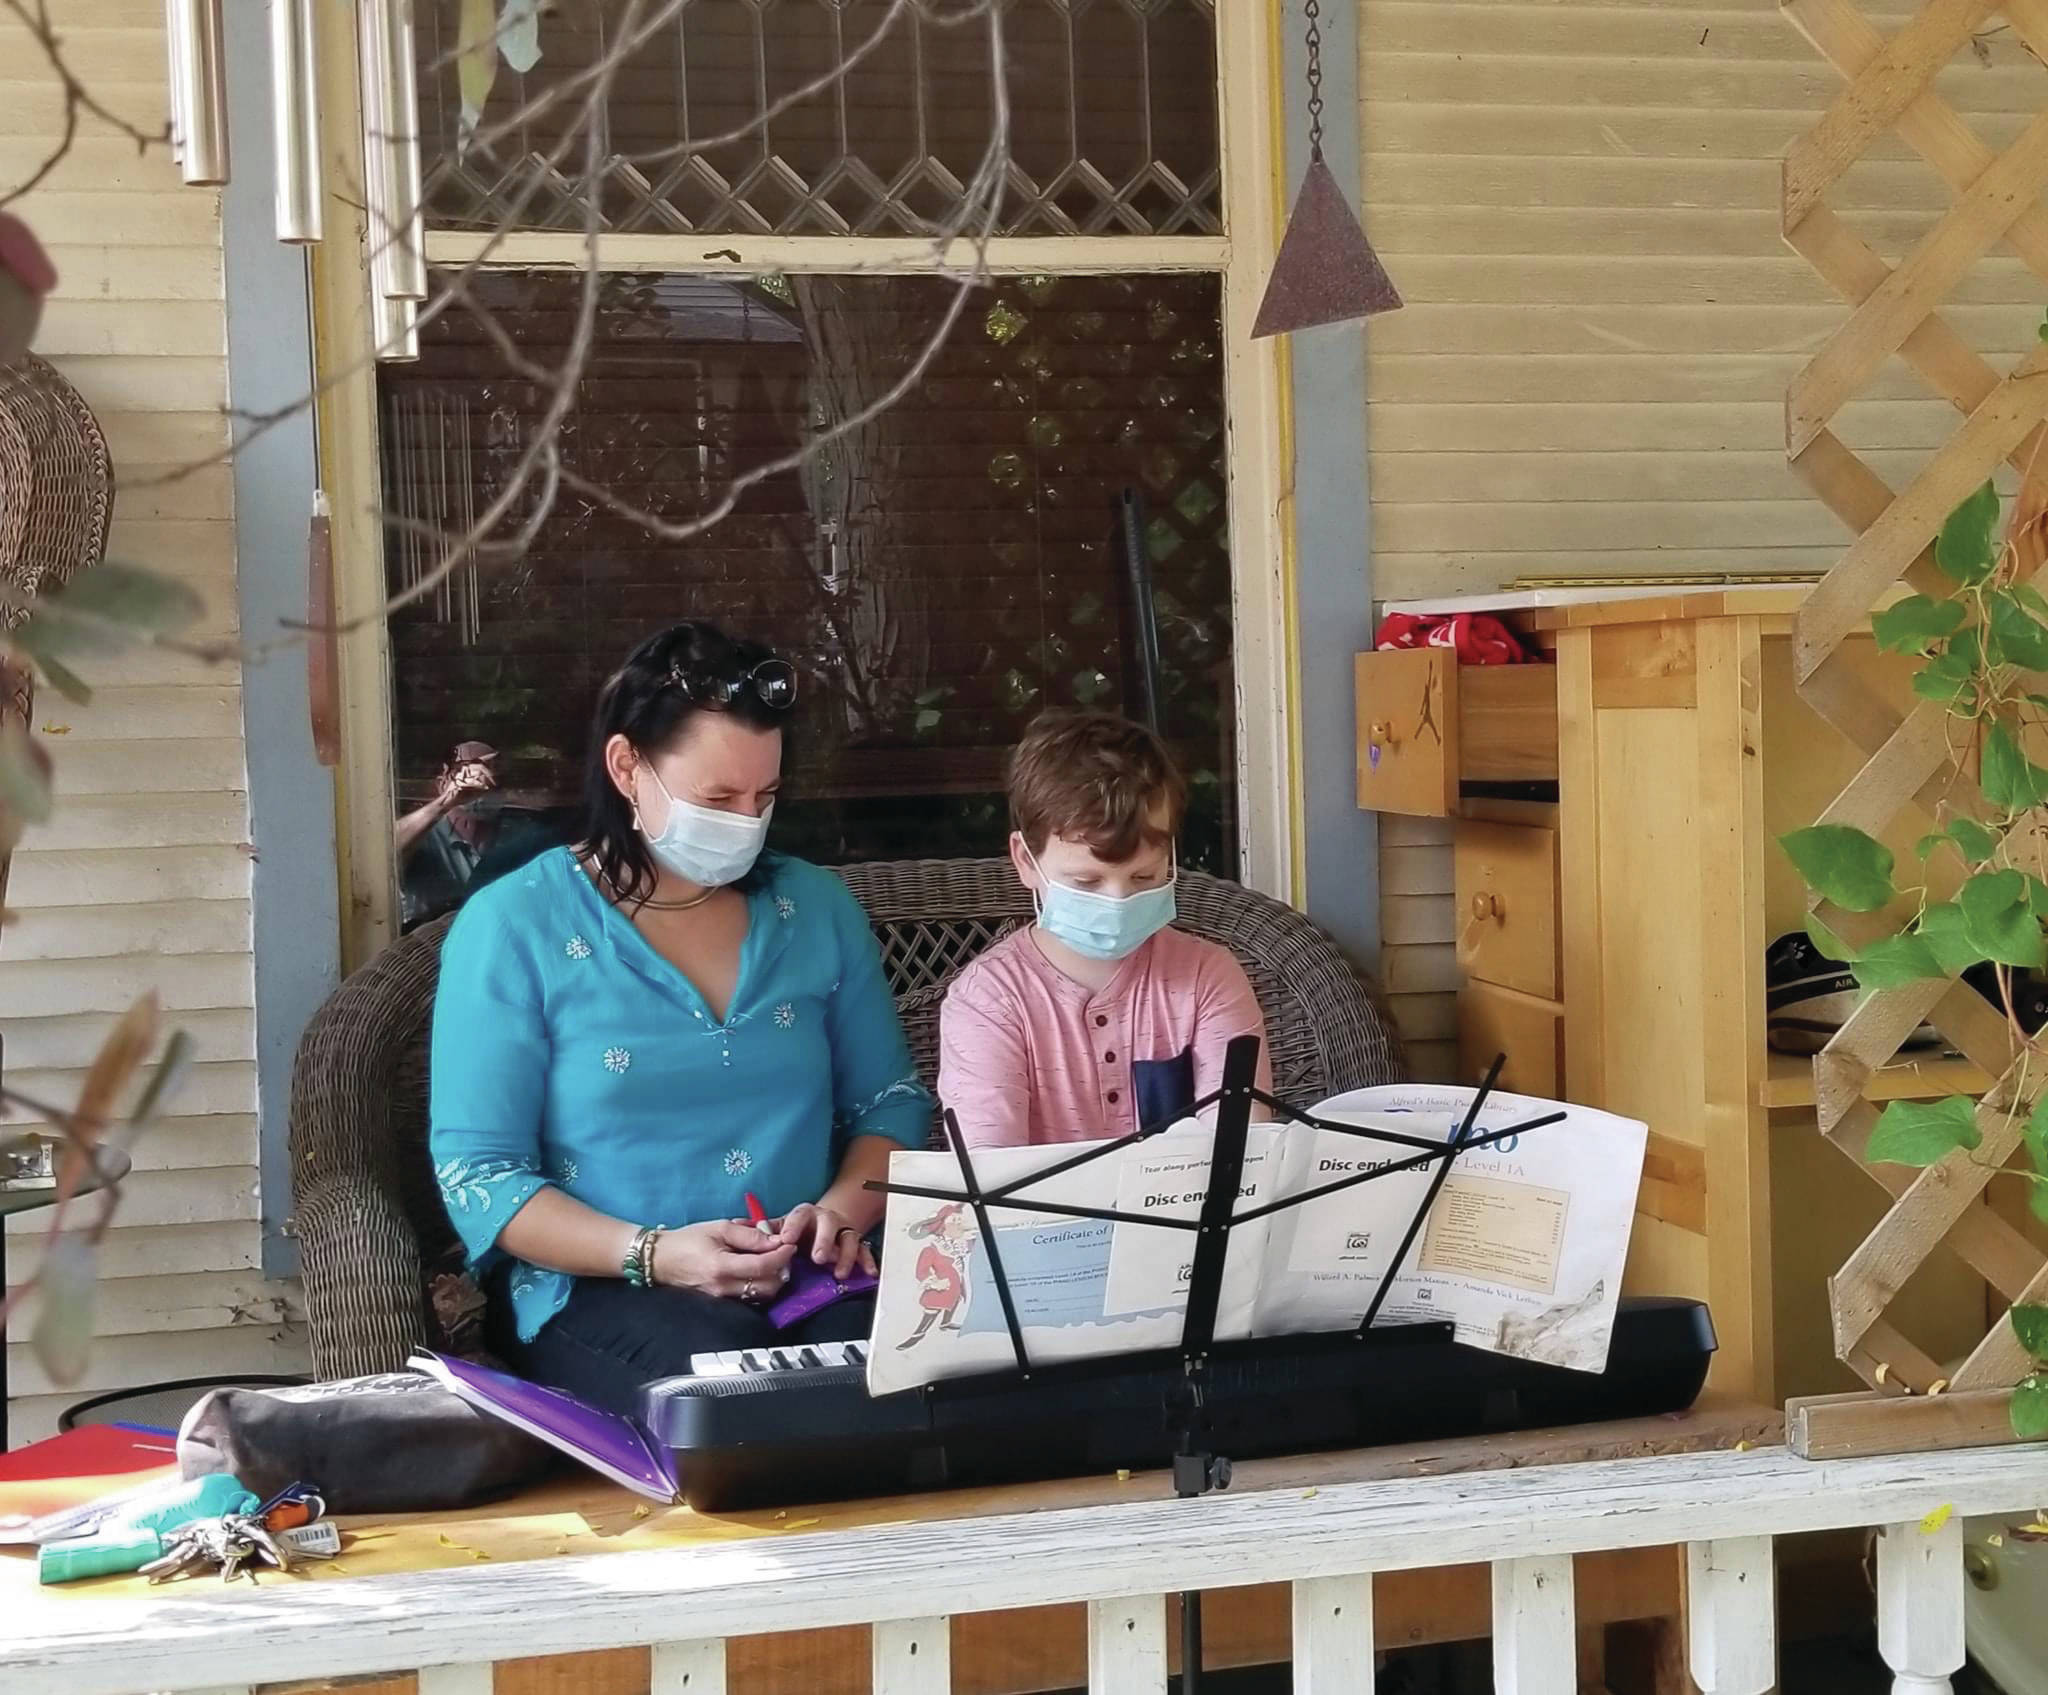 Willy Talbot and his piano teacher Angela McJunkin resume piano lessons on the family’s deck, on Sept. 23, 2020, in Madison, Wisconsin. The photo was submitted for “Behind the Mask - Our Stories.” (Photo by Terry Talbot; courtesy of Christina Whiting)